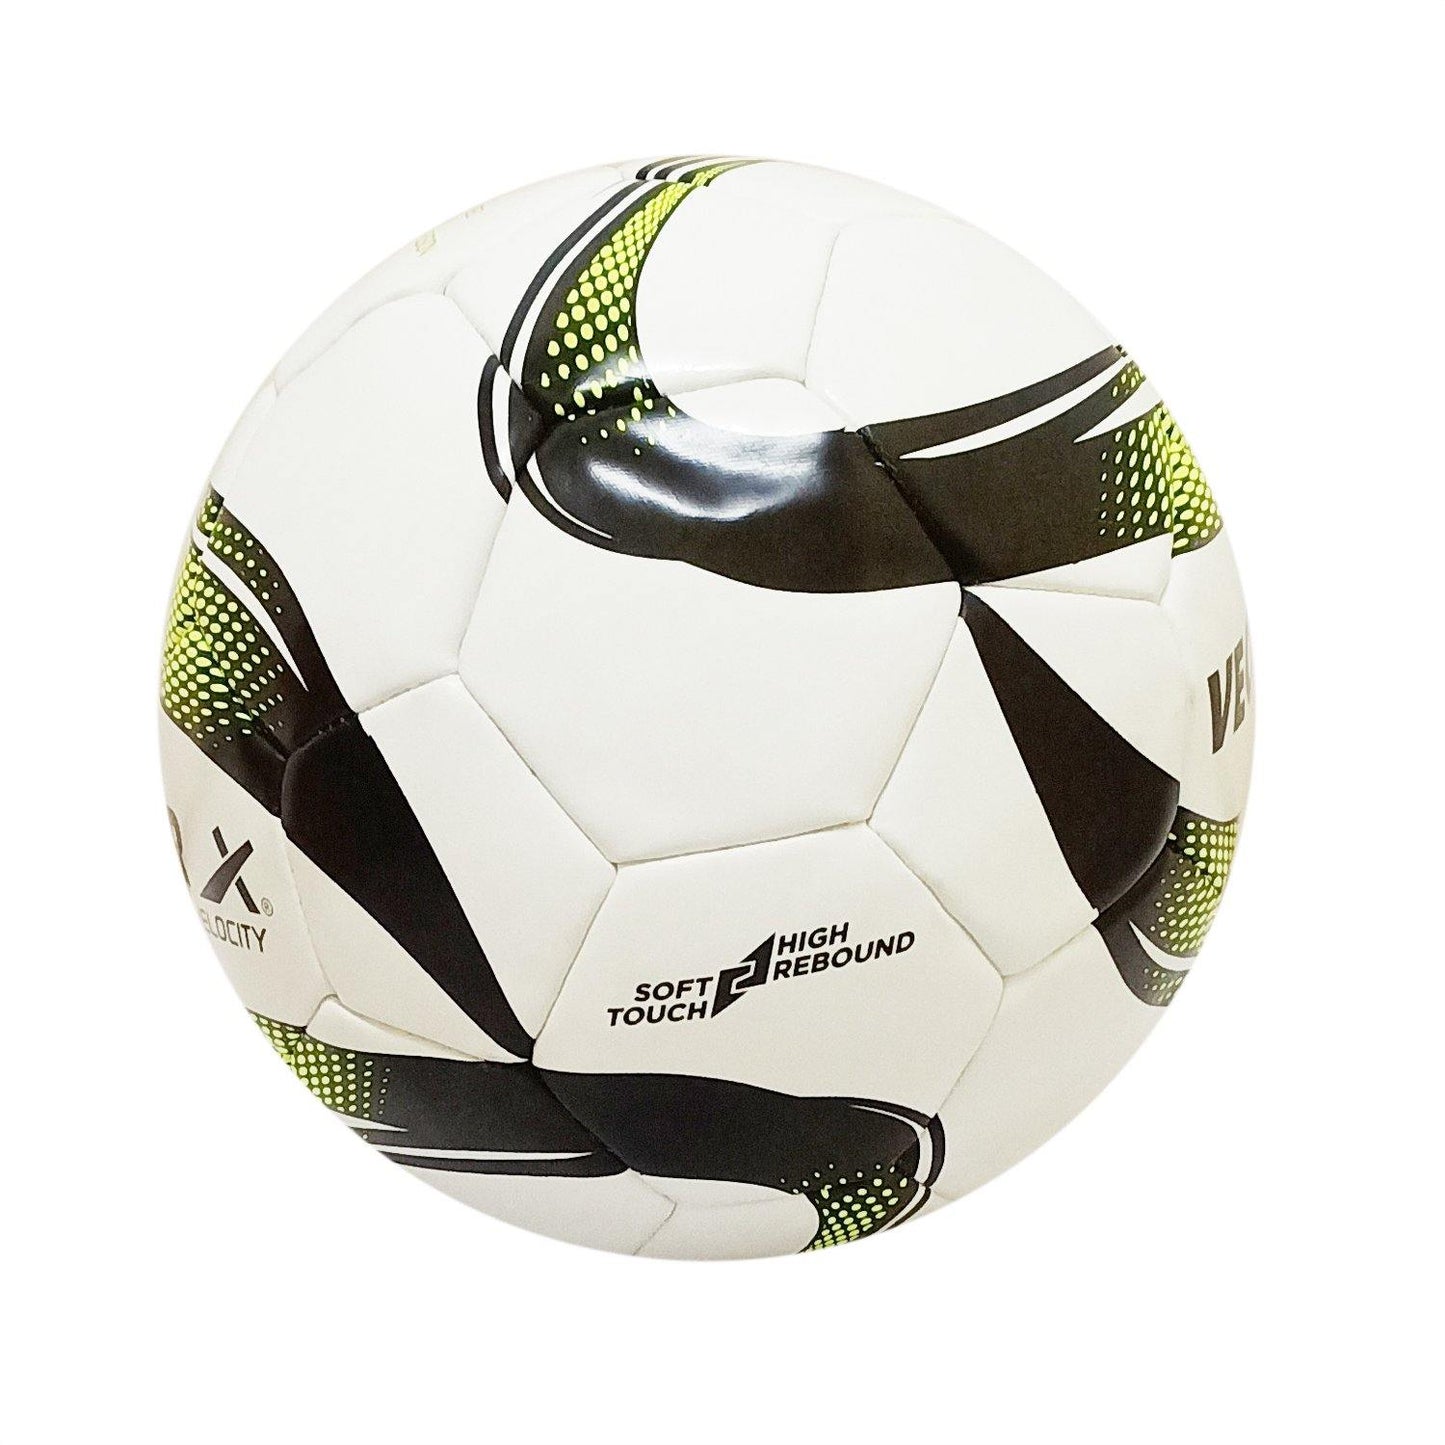 Vector X Thermo Bonded Velocity Football, Size 5 (White/Lime) - Best Price online Prokicksports.com